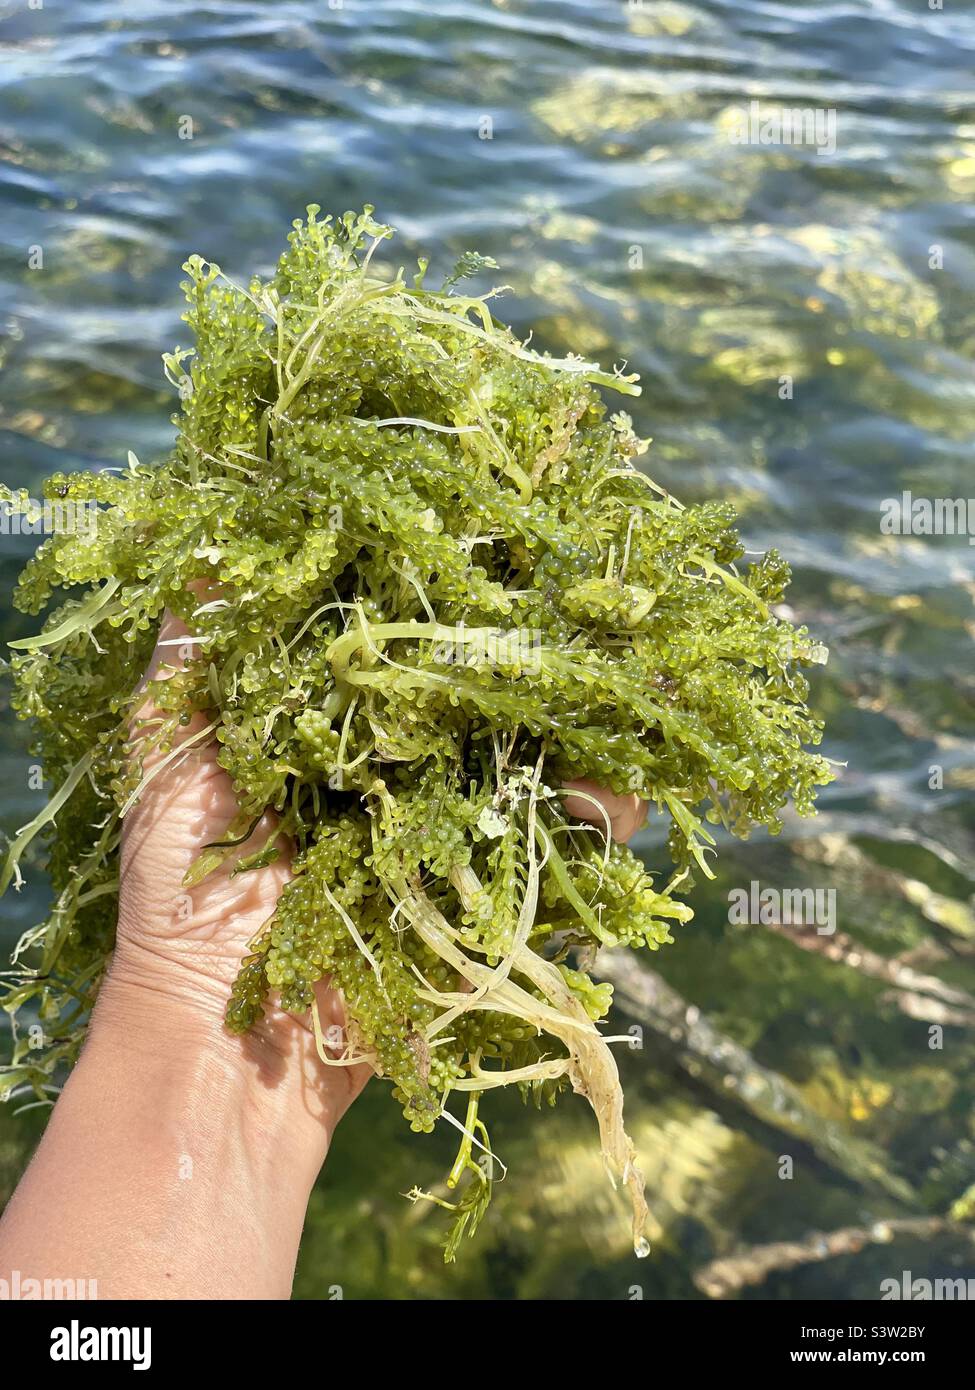 Lato or sea grapes are the green caviar of the sea. They beautifully pops in the mouth with delicate breath of the ocean. They are eaten fresh as a salad or as a side dish in the Philippines. Stock Photo